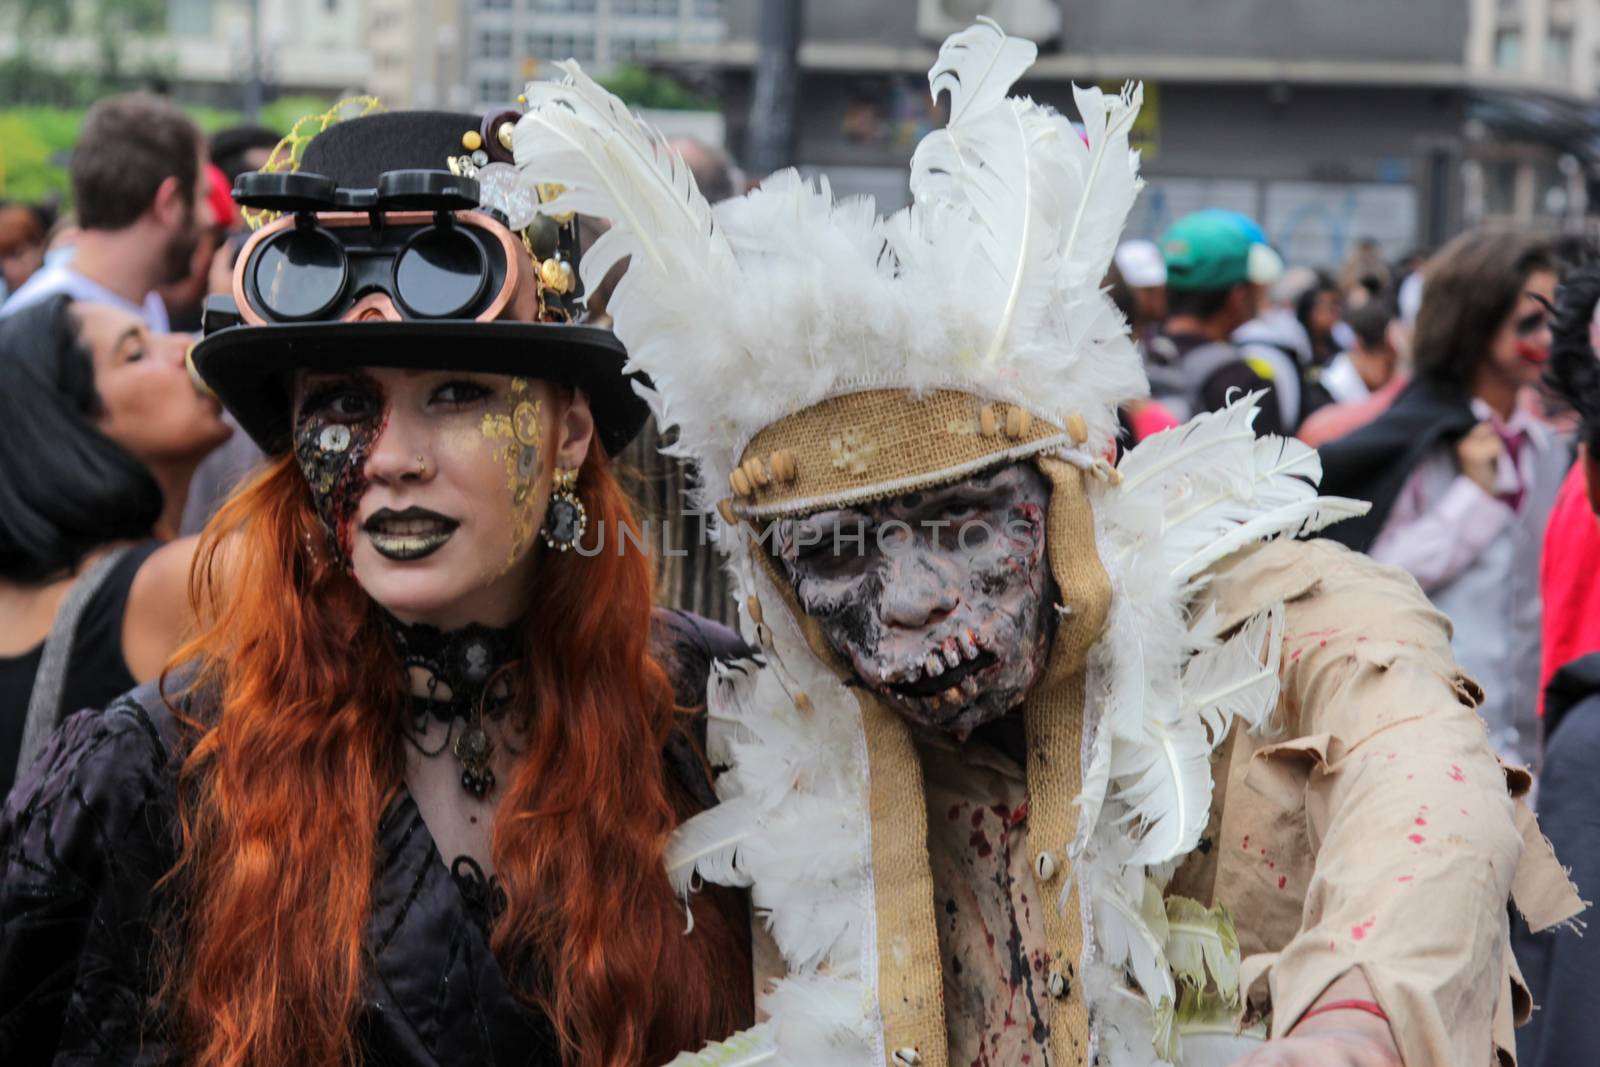 Couple in costumes in Zombie Walk Sao Paulo by marphotography